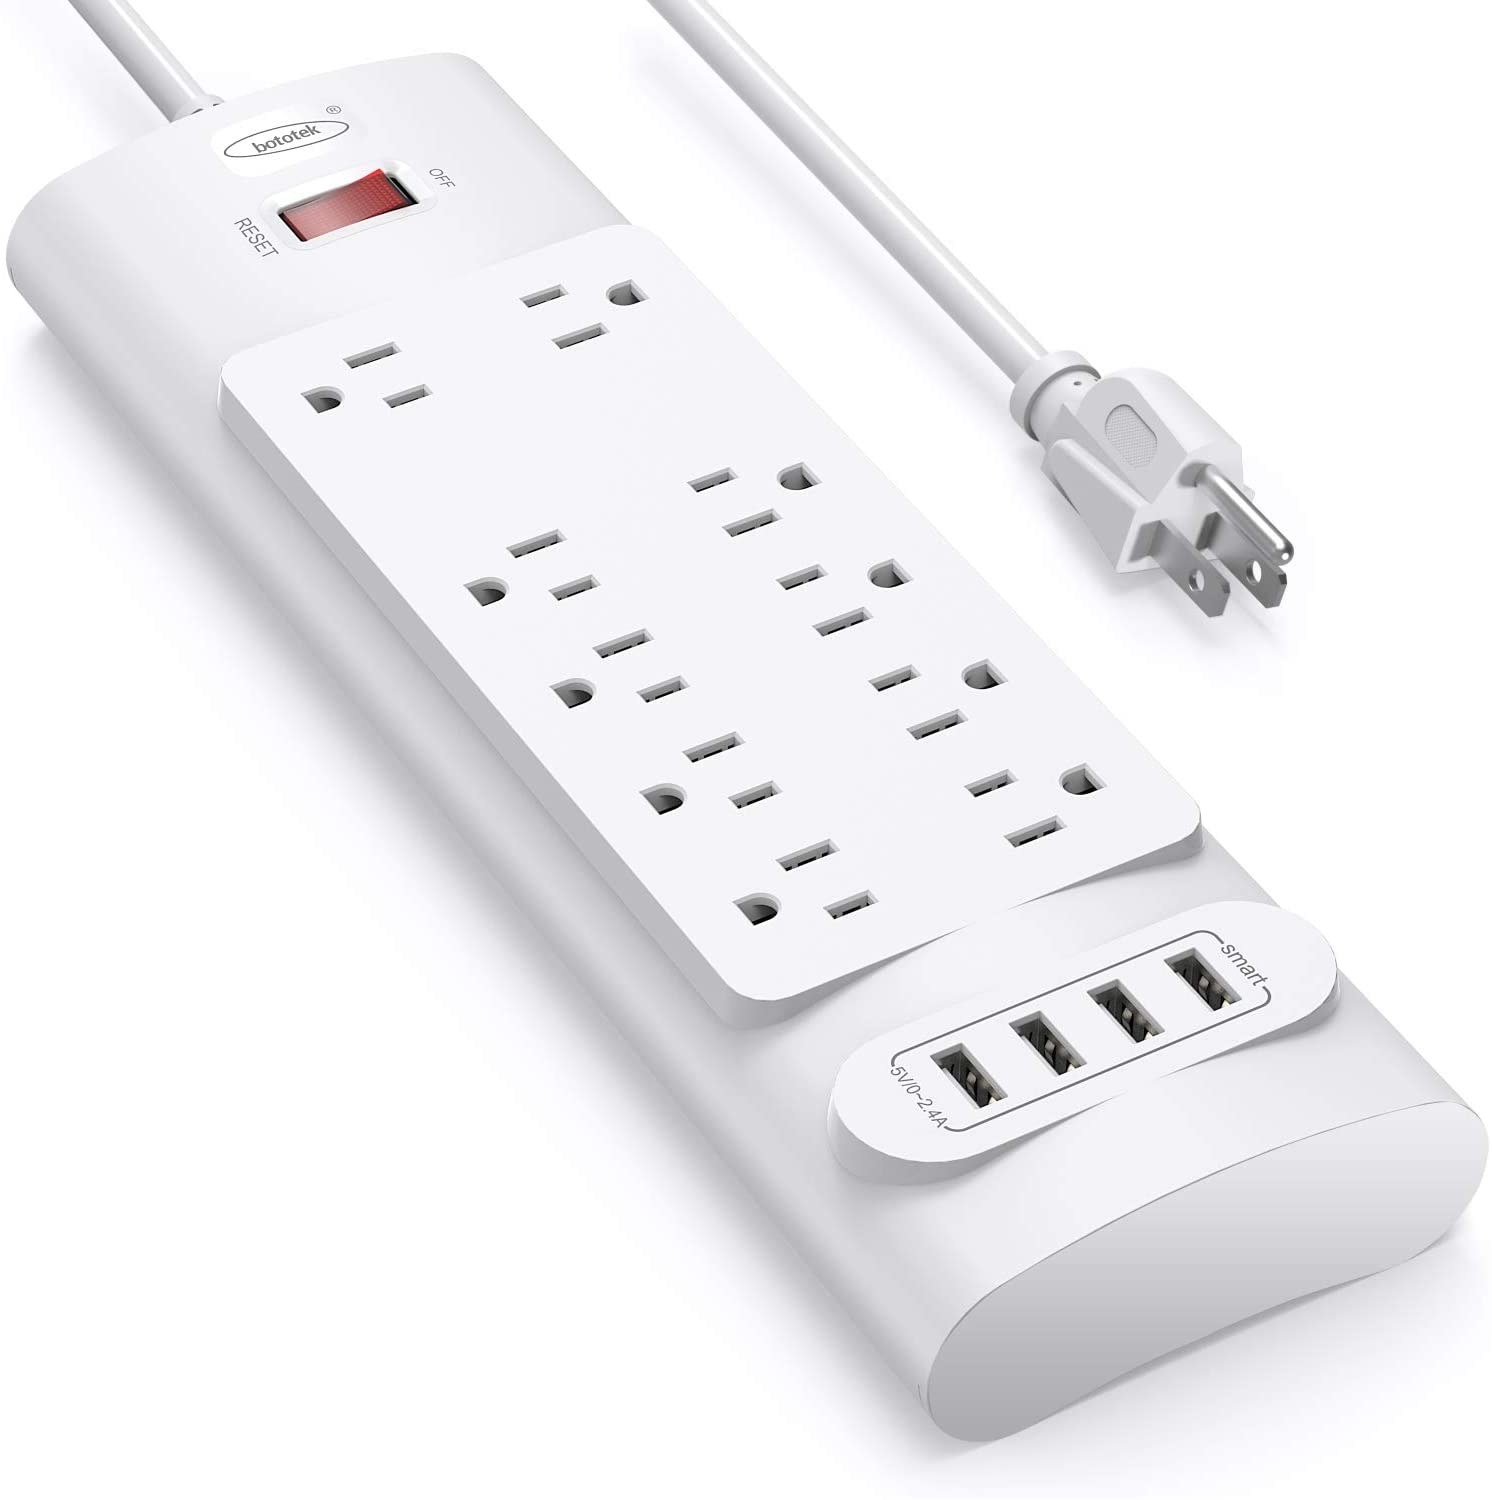 An unplugged white surge protector with ten empty plugs and four empty USB ports